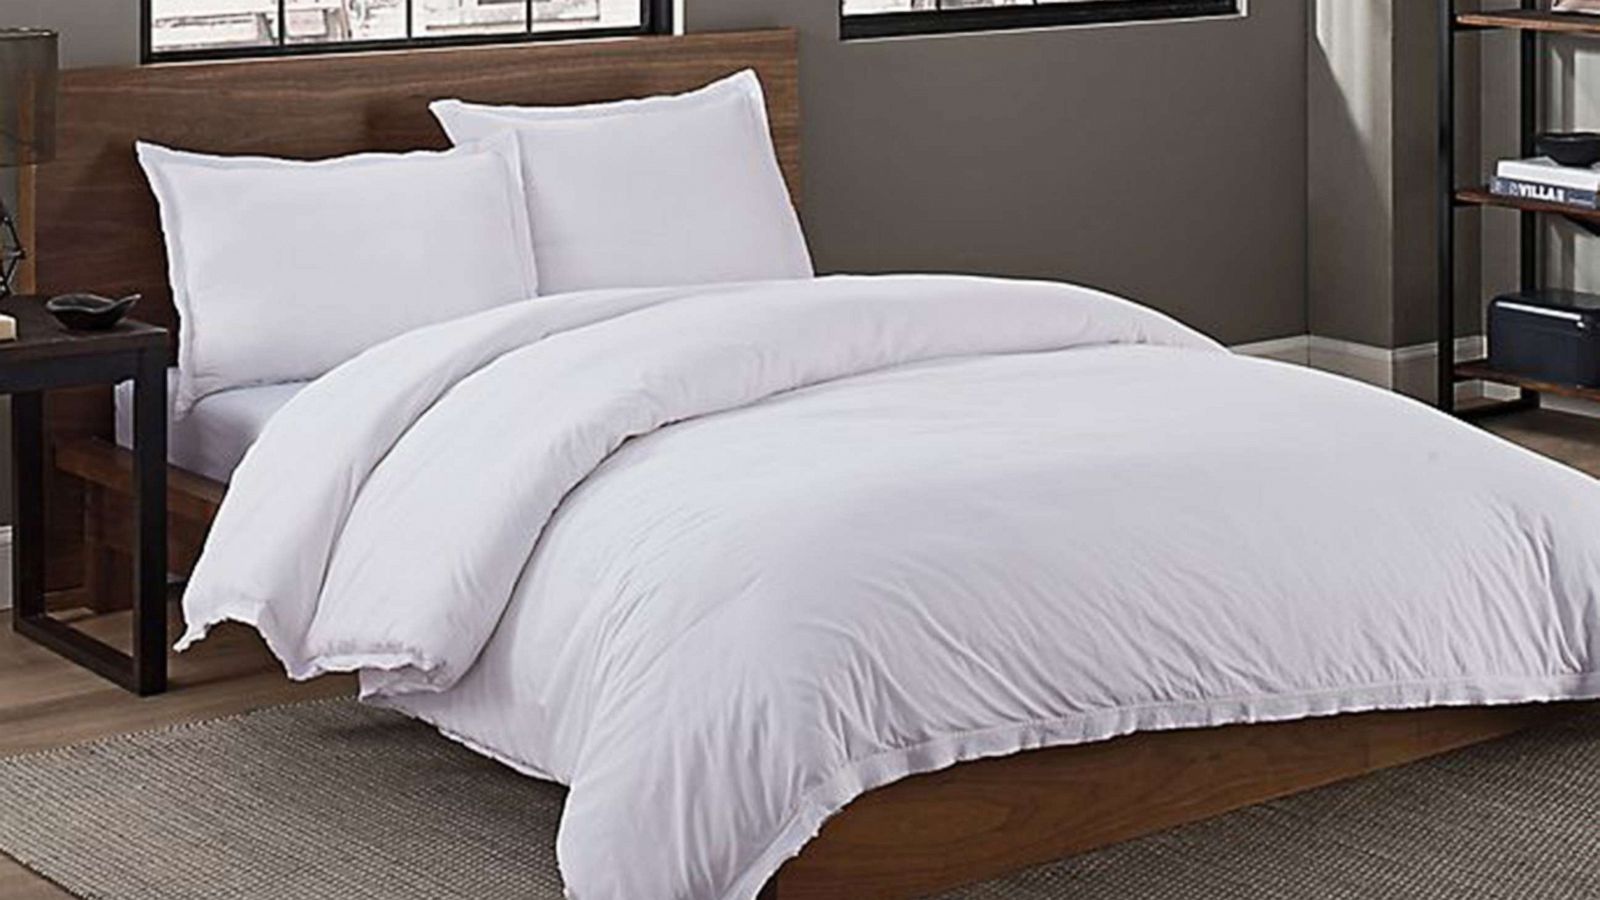 Bed Bath Beyond Labor Day, King Size Electric Blanket Bed Bath And Beyond